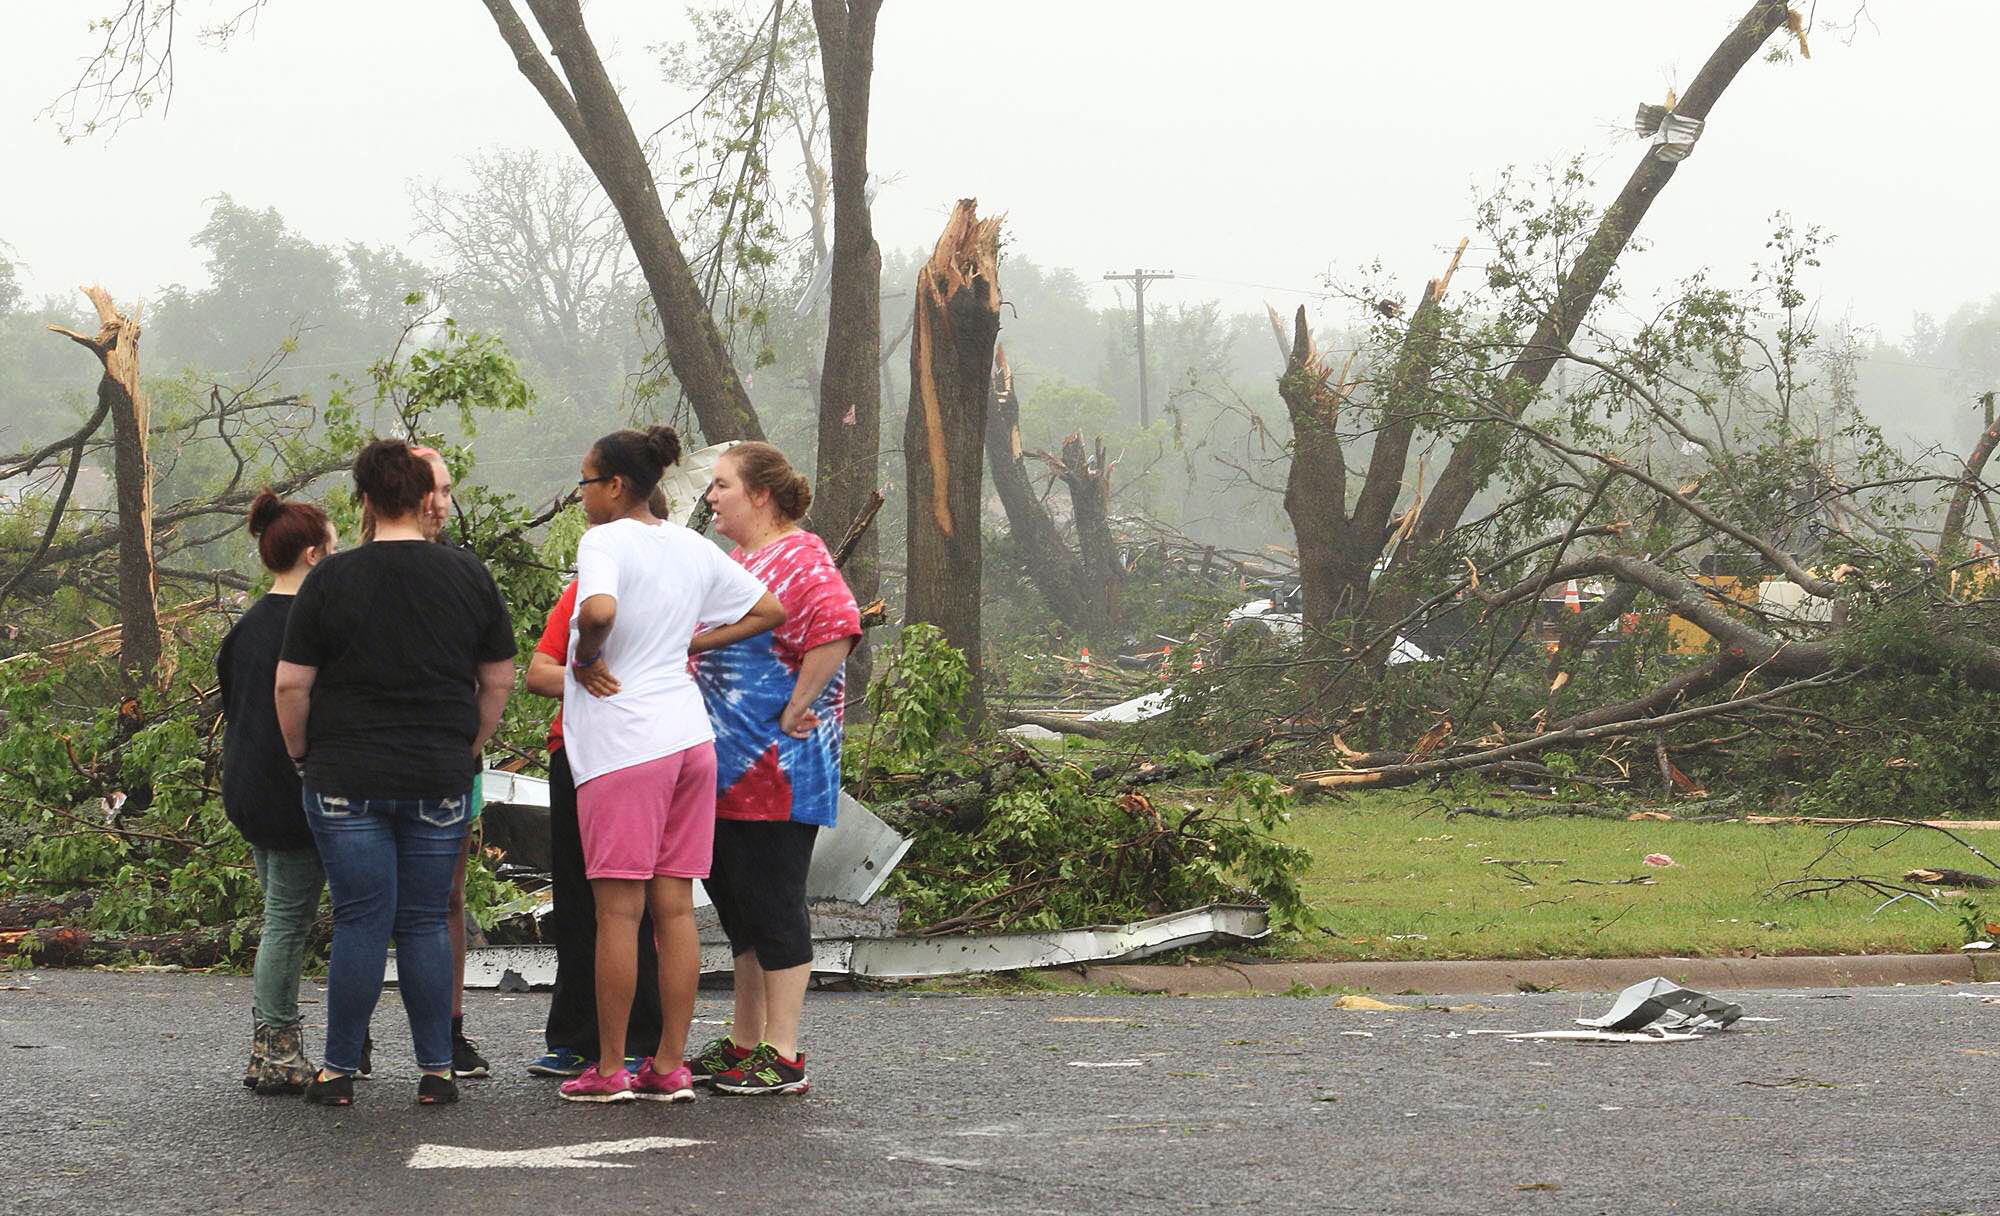 Residents survey damage near an elementary school, caused by severe weather in Van, Texas. About 30 per cent of the community was damaged from the storm late Sunday, according to Chuck Allen, fire marshal and emergency management coordinator for Van Zandt County. 